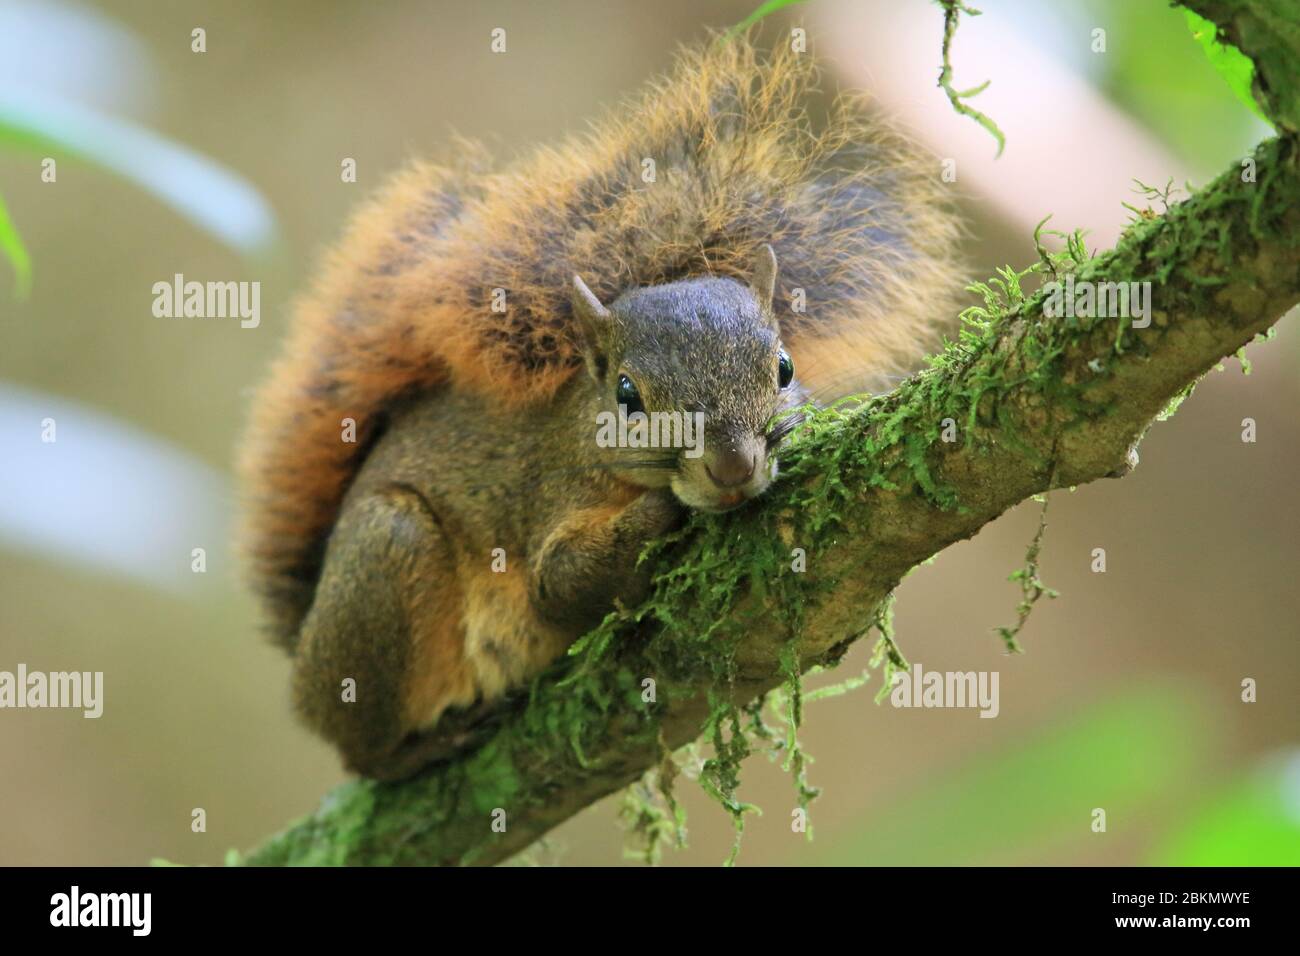 Red-tailed Squirrel (Sciurus granatensis) on branch. Lowland rainforest, Corcovado National Park, Osa Peninsula, Costa Rica. Stock Photo